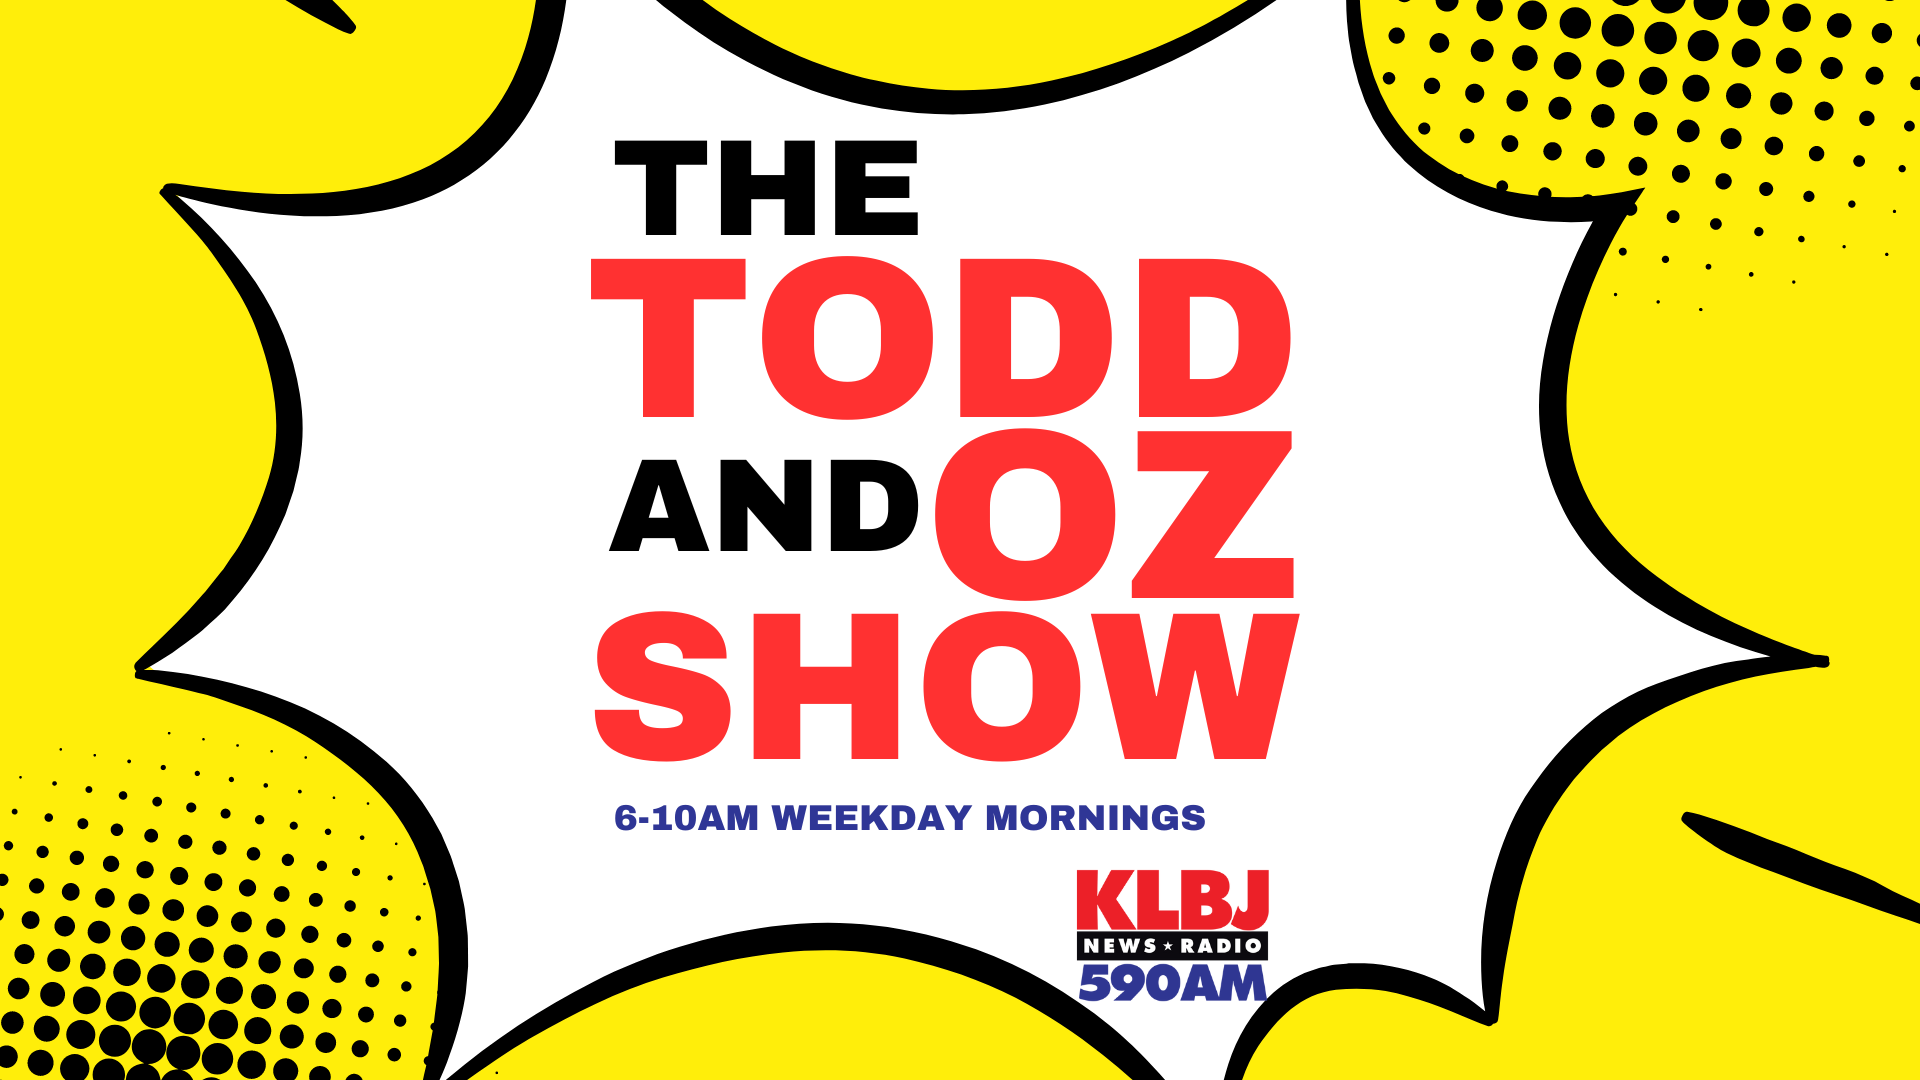 The Todd and Oz Show